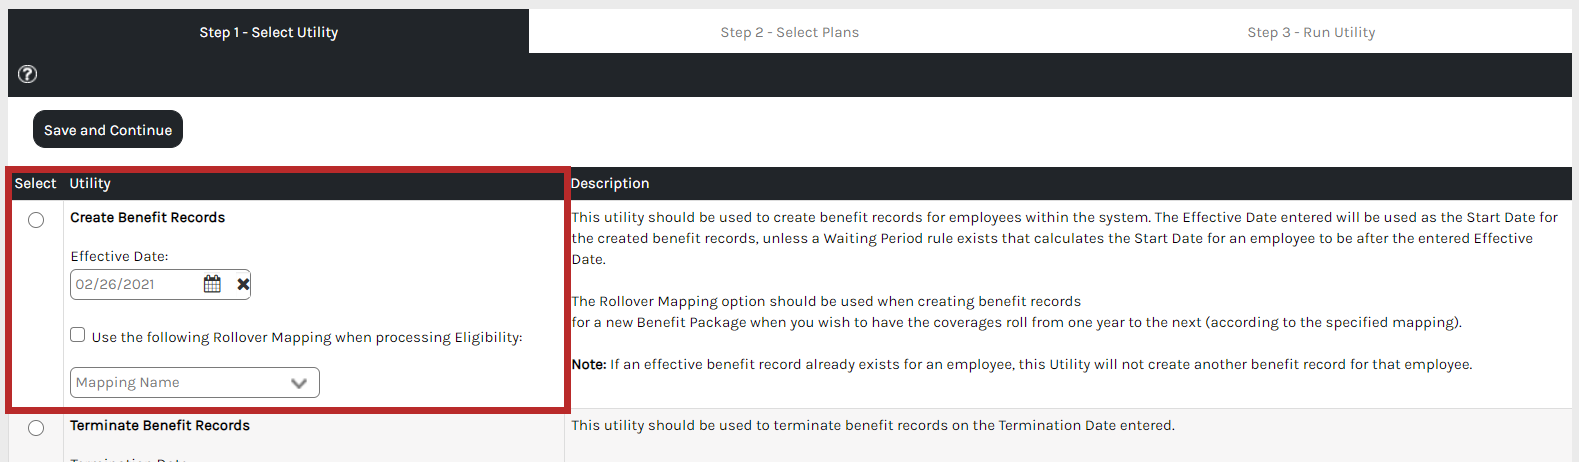 CHR_-_Settings_-_Benefit_Management_-_Plan_Utilities_-_OE_-_00.png